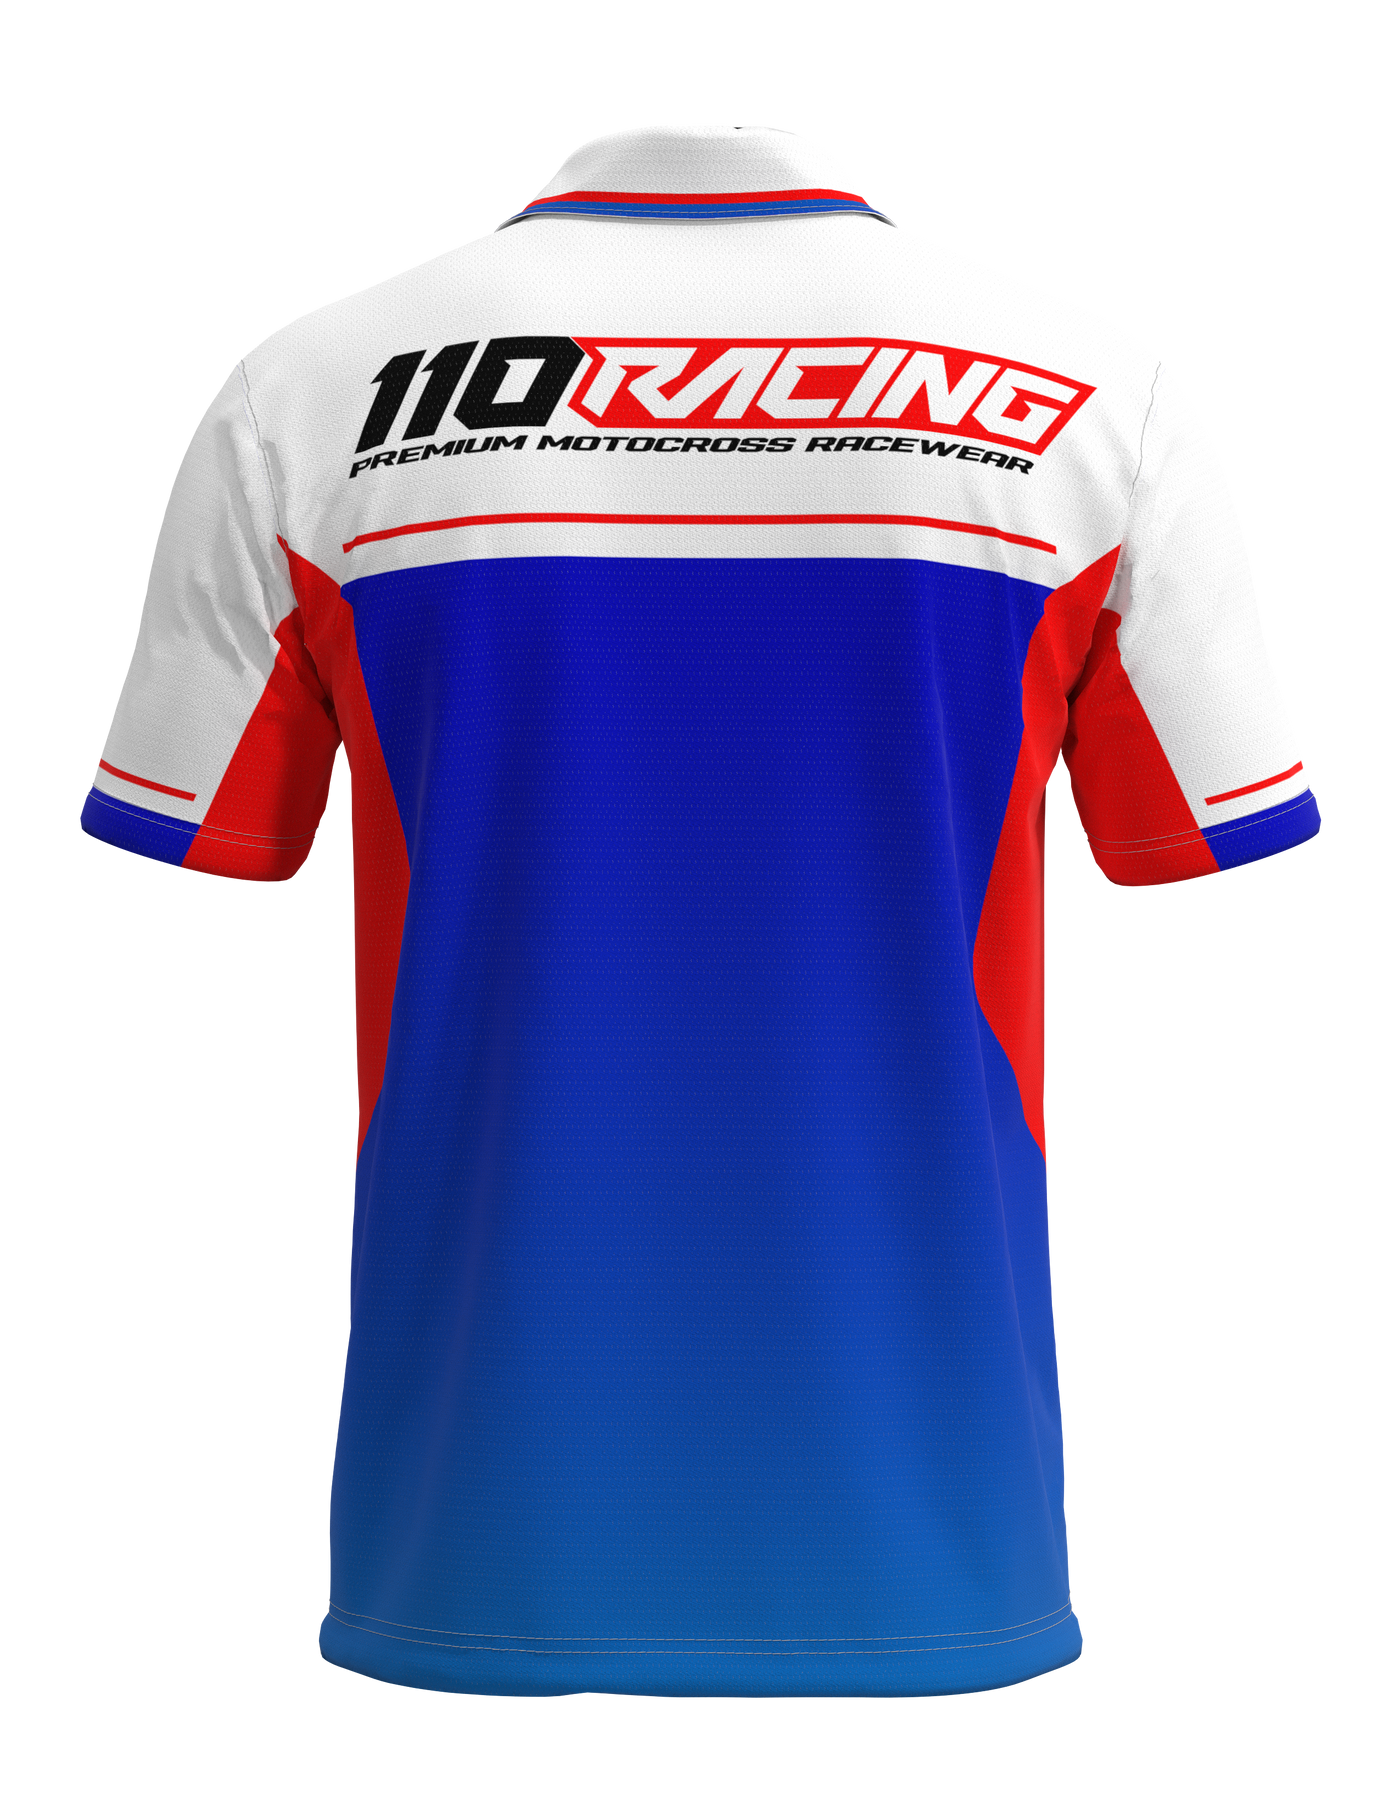 110 RACING // CUSTOM PIT POLO - RED/WHITE/BLUE